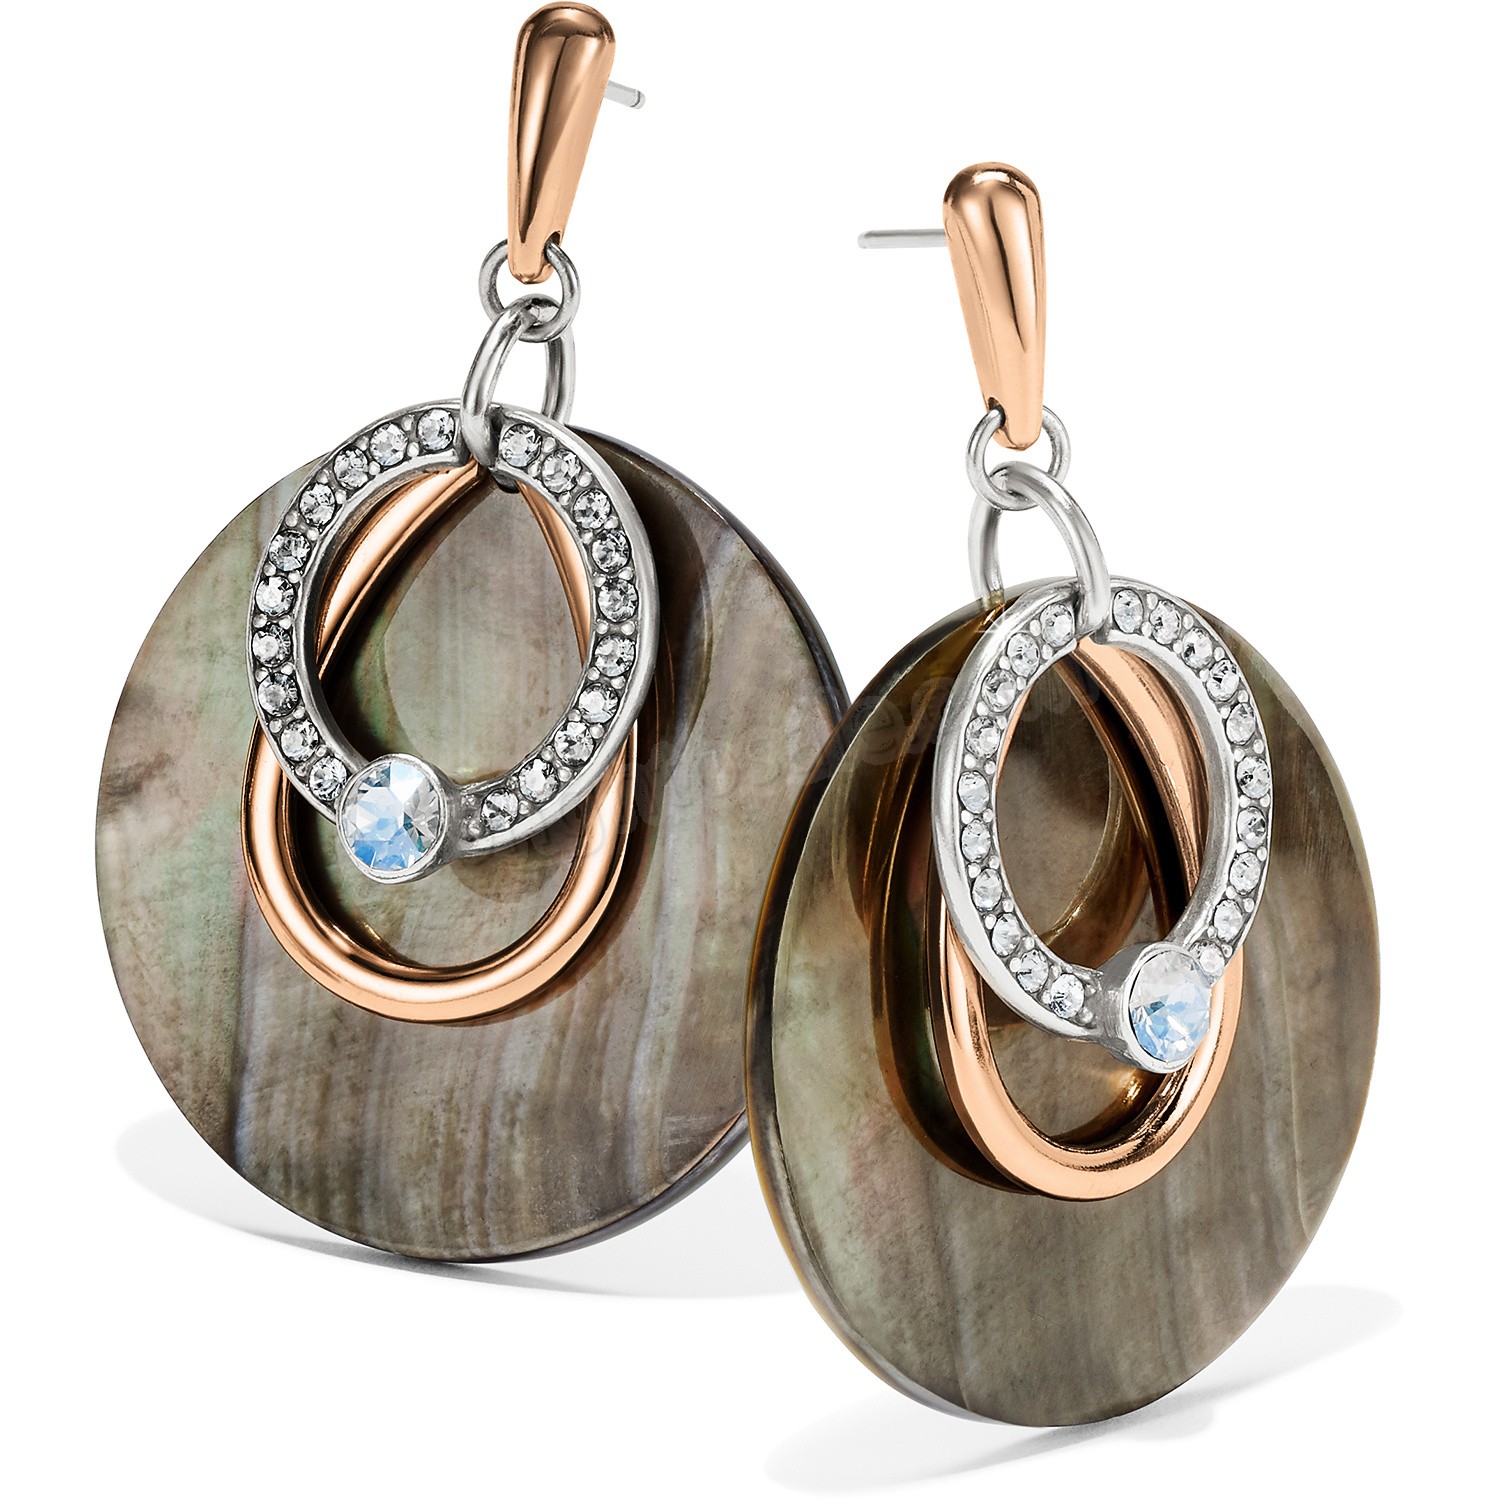 Brighton Collectibles & Online Discount Neptune's Rings Shell Post Drop Earrings - Brighton Collectibles & Online Discount Neptune's Rings Shell Post Drop Earrings